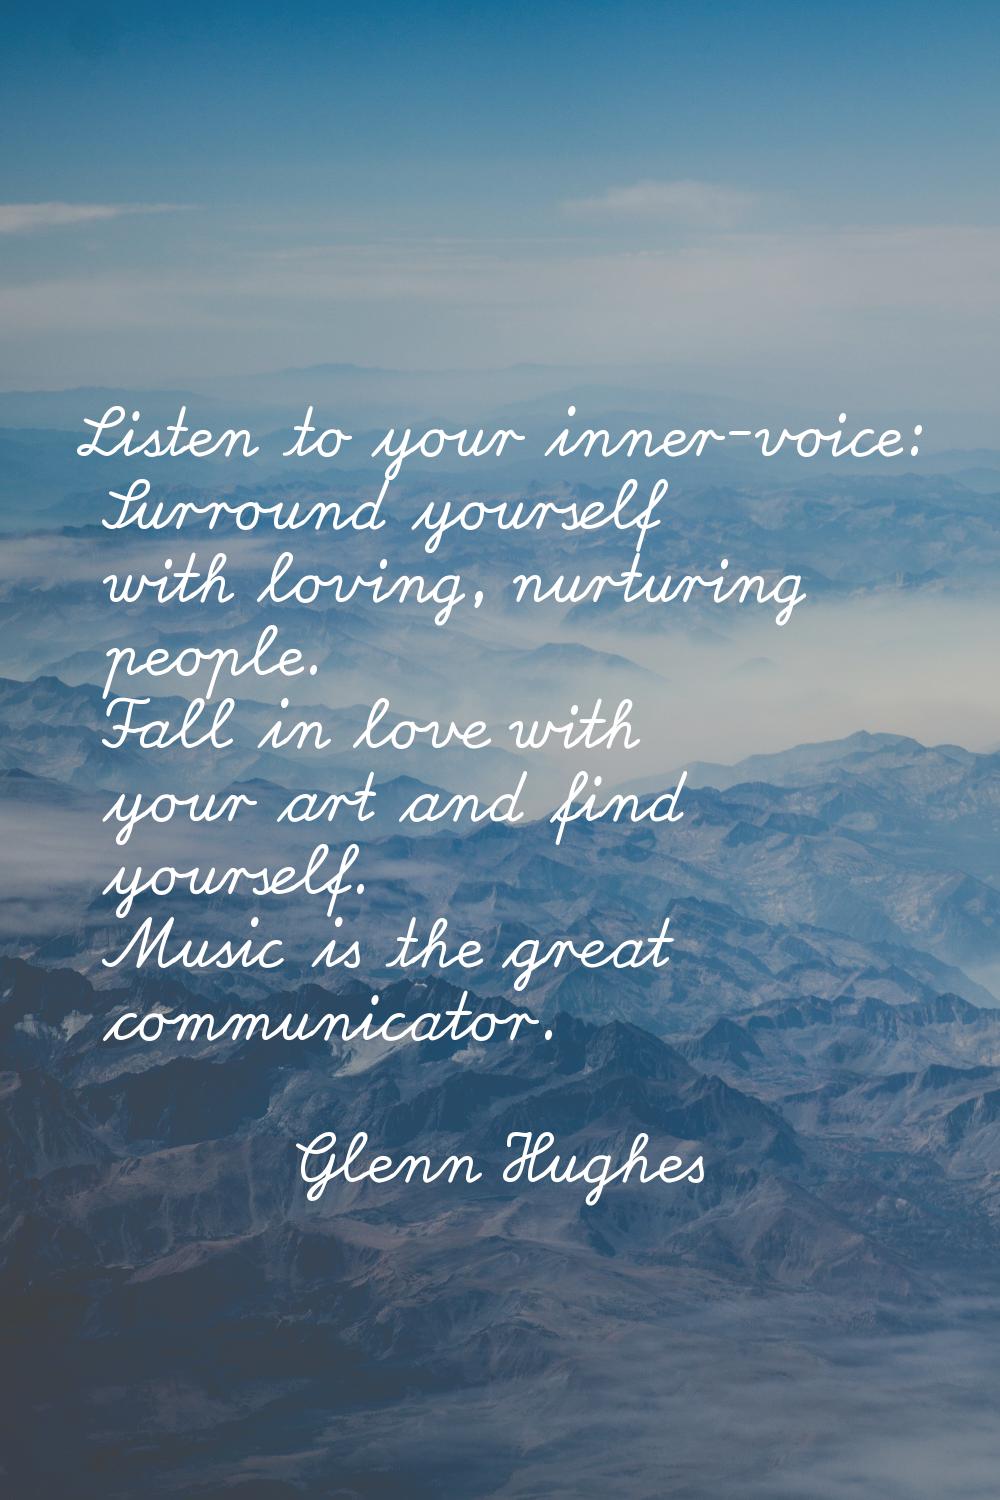 Listen to your inner-voice: Surround yourself with loving, nurturing people. Fall in love with your